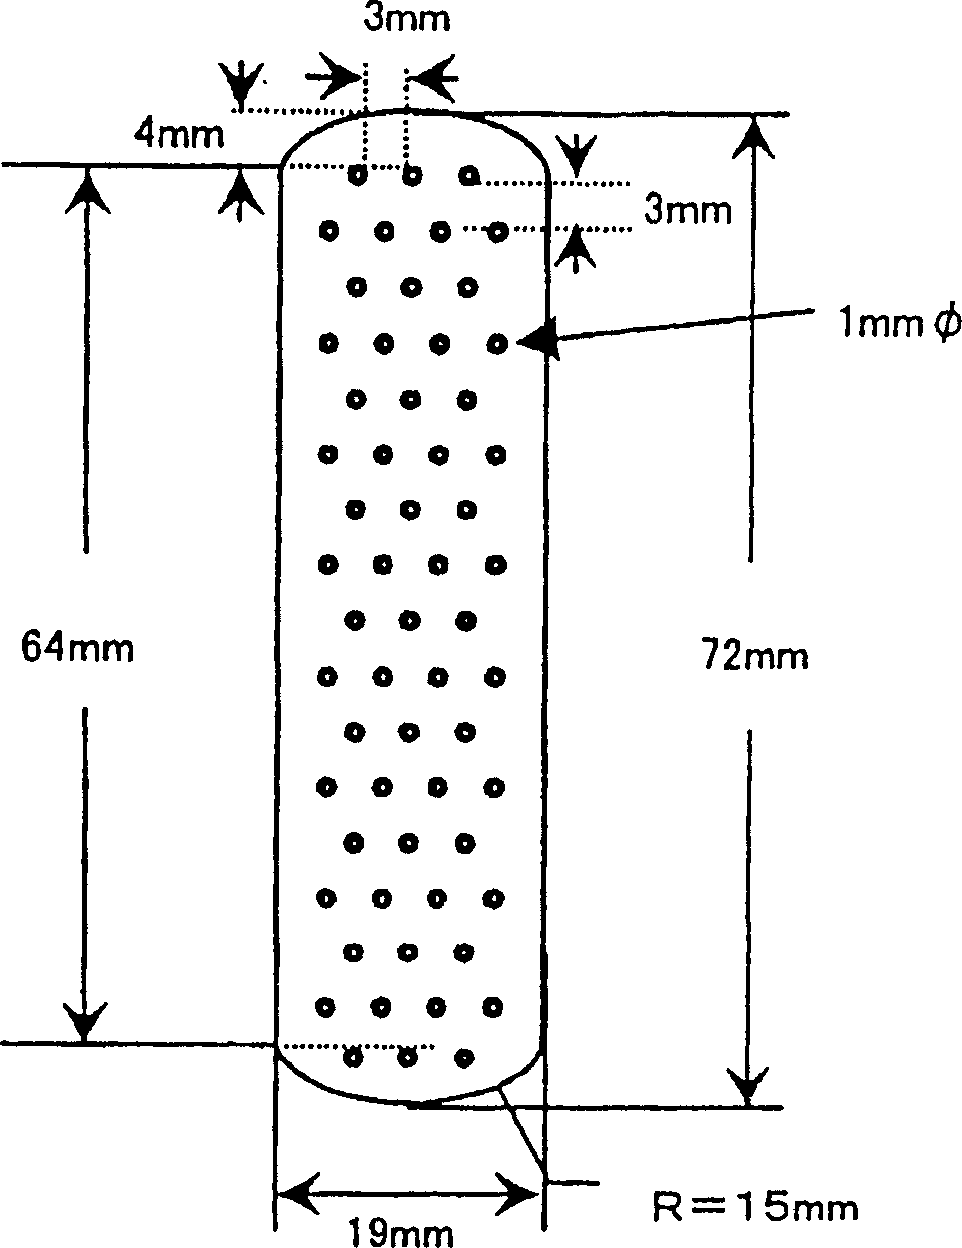 Pressure-sensitive adhesive sheet for application to skin and first-aid plaster